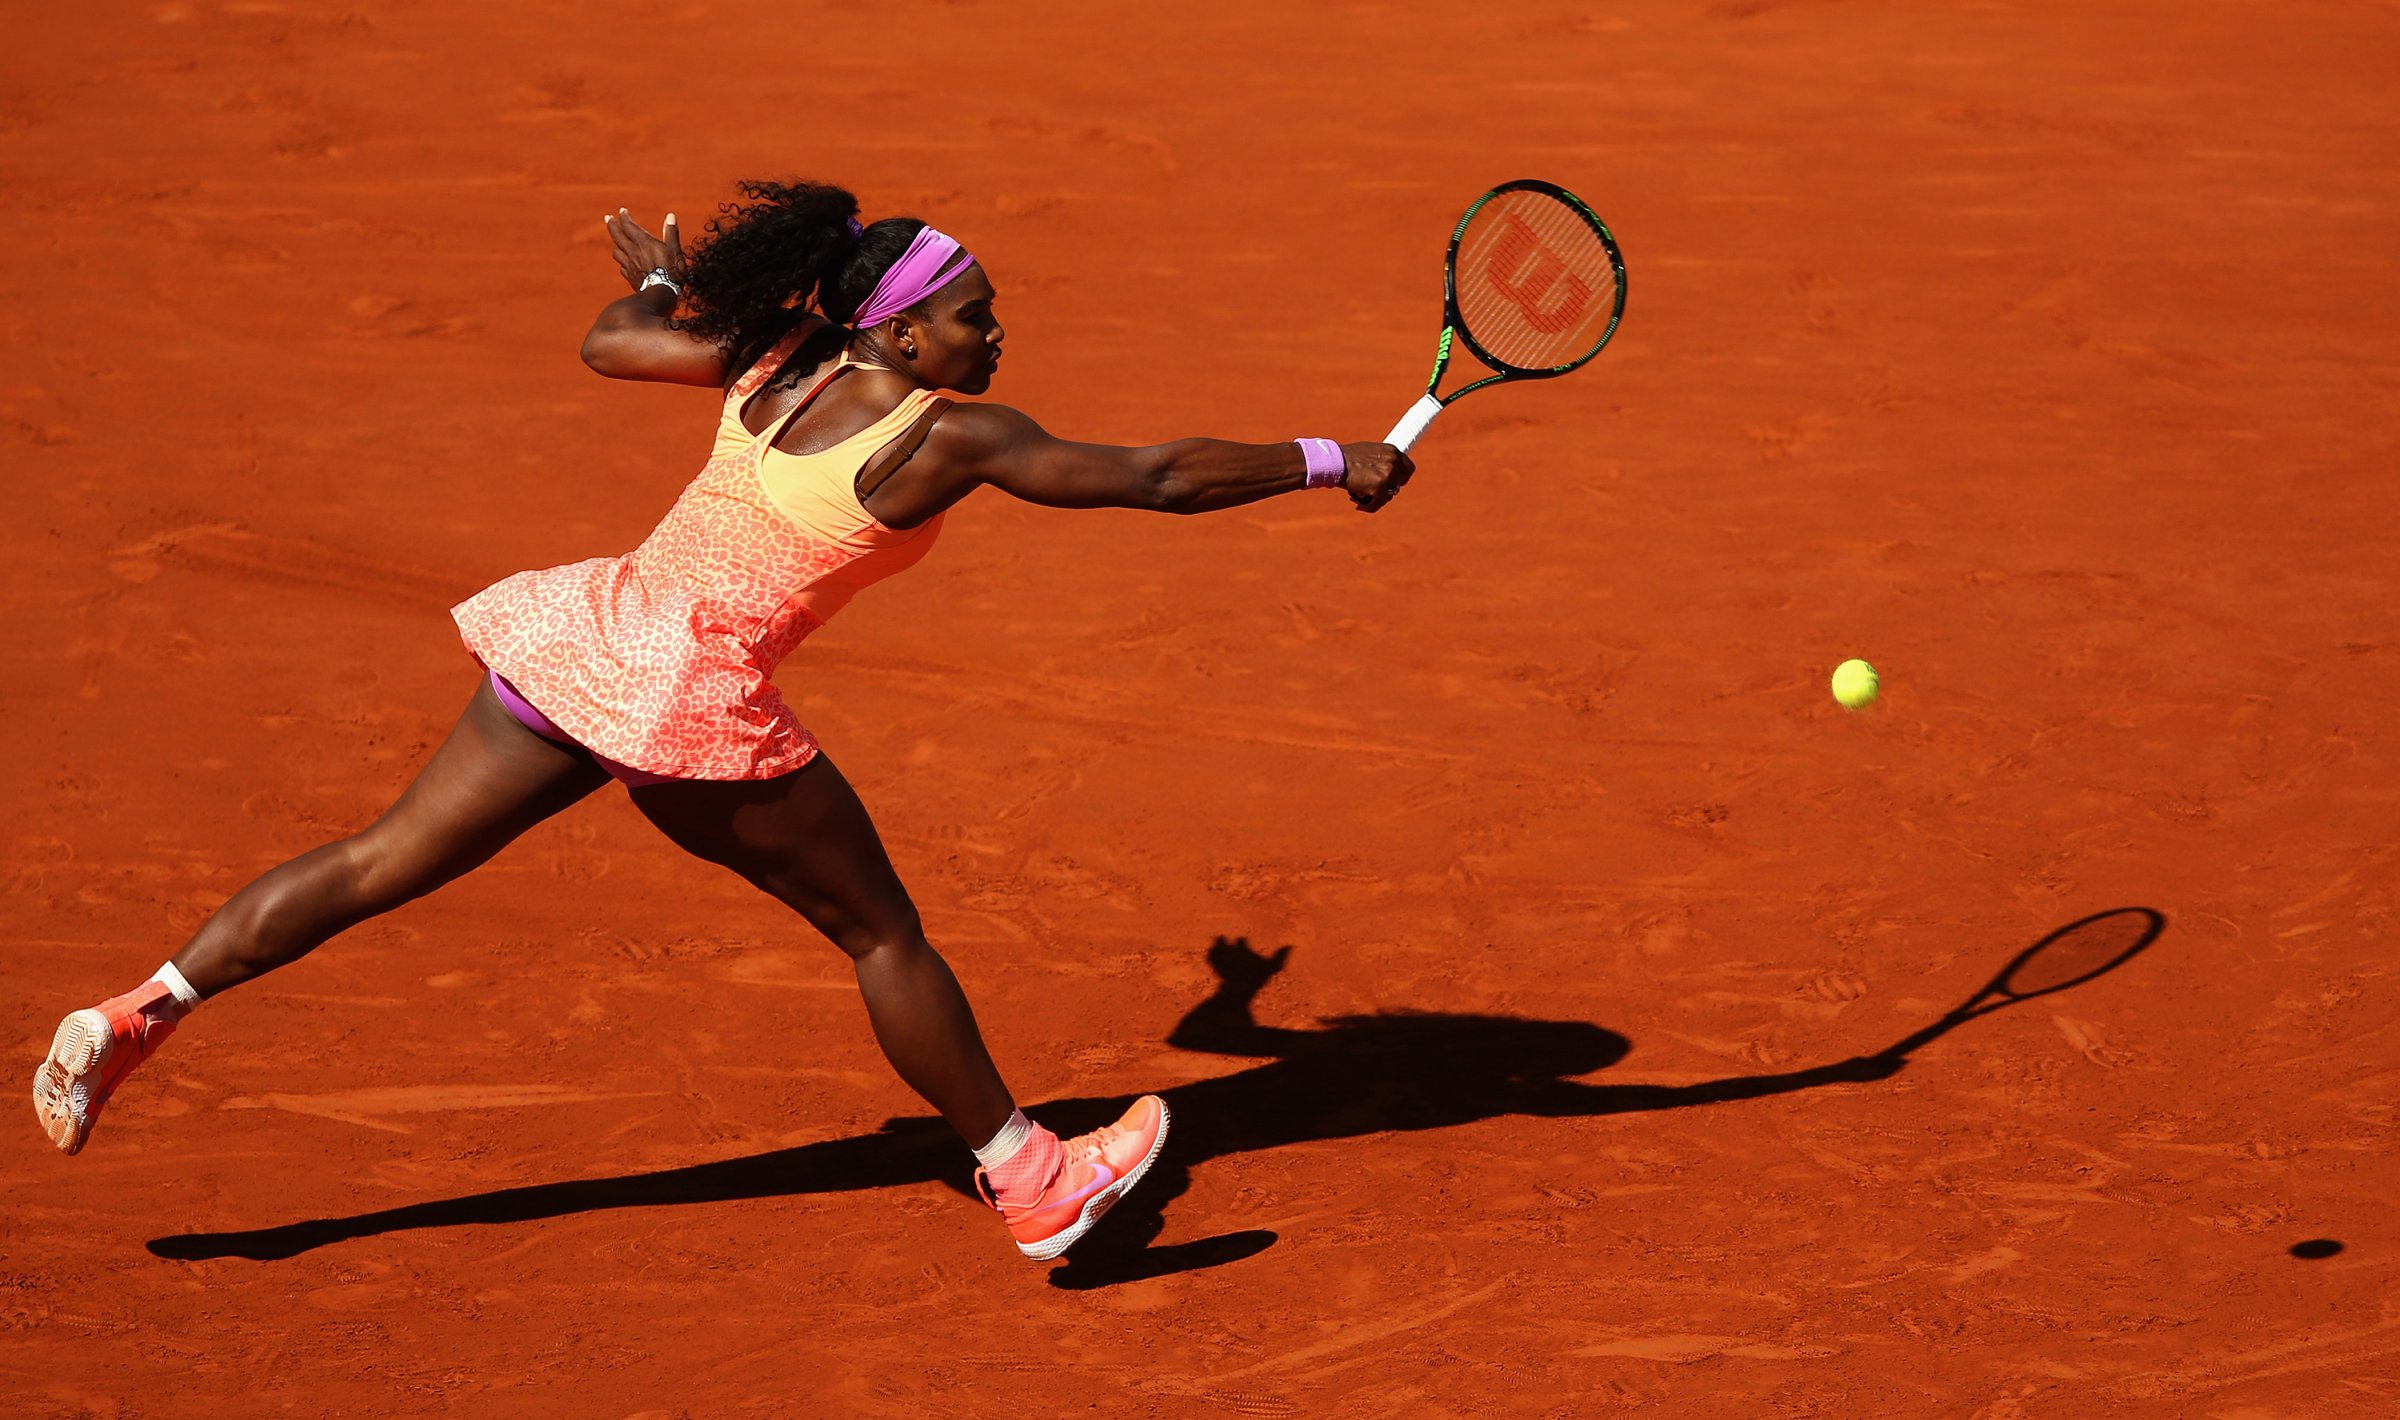 Williams’ French Open victory was her 20th major win, four behind the women’s all-time career record.